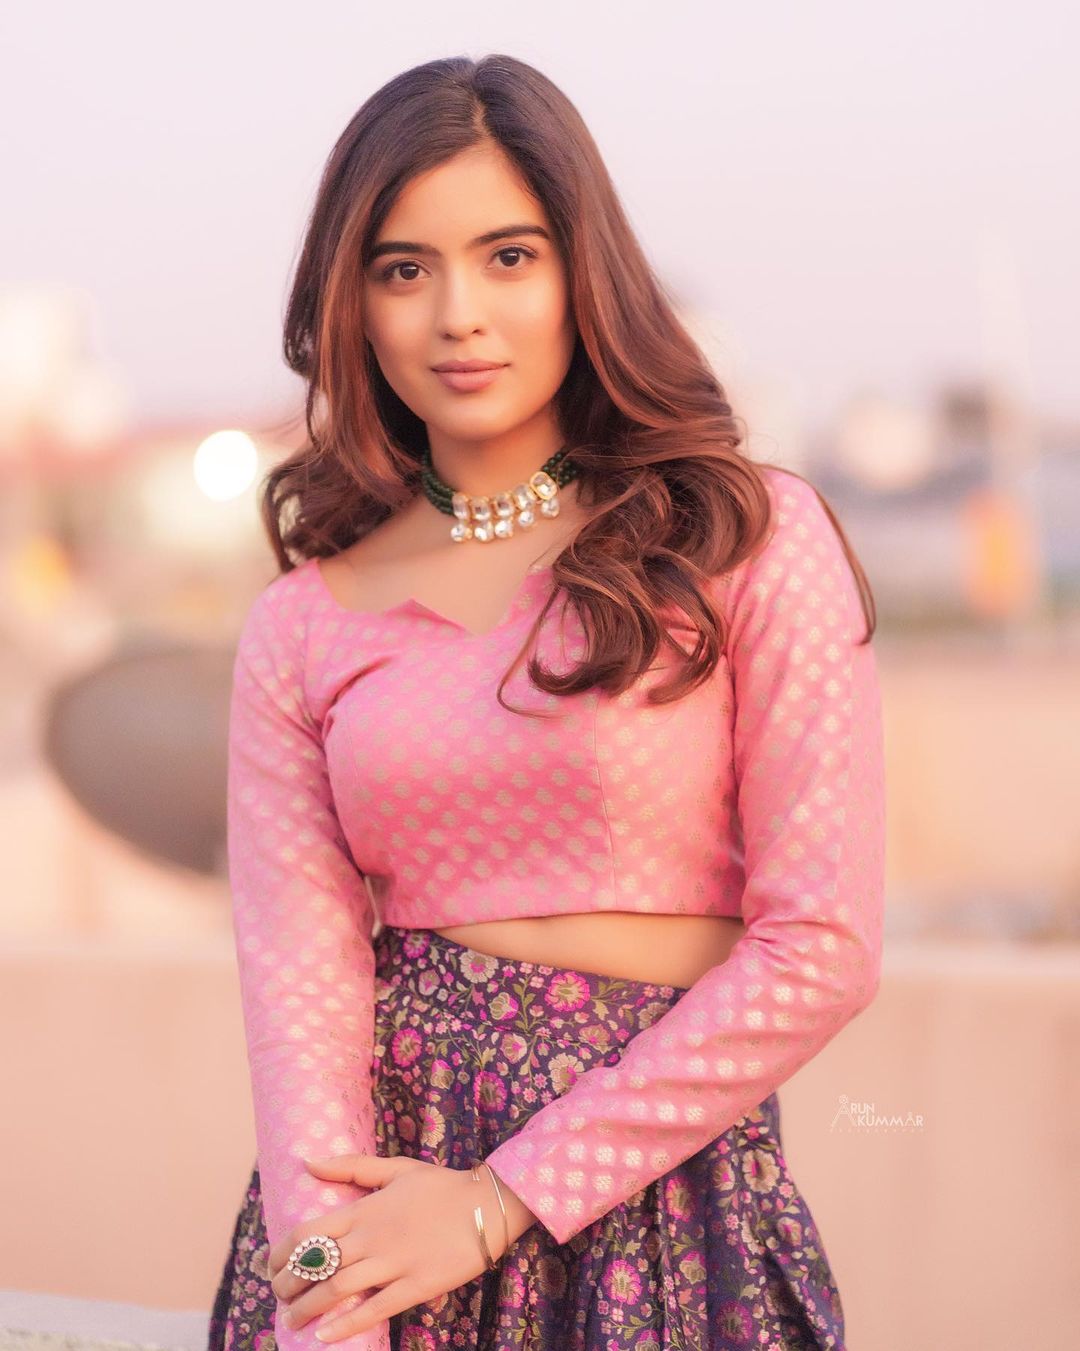 Actress amritha aiyer slays with this awesome pictures-Amrithaaiyer, Actressamritha, Amritha Aiyer Photos,Spicy Hot Pics,Images,High Resolution WallPapers Download